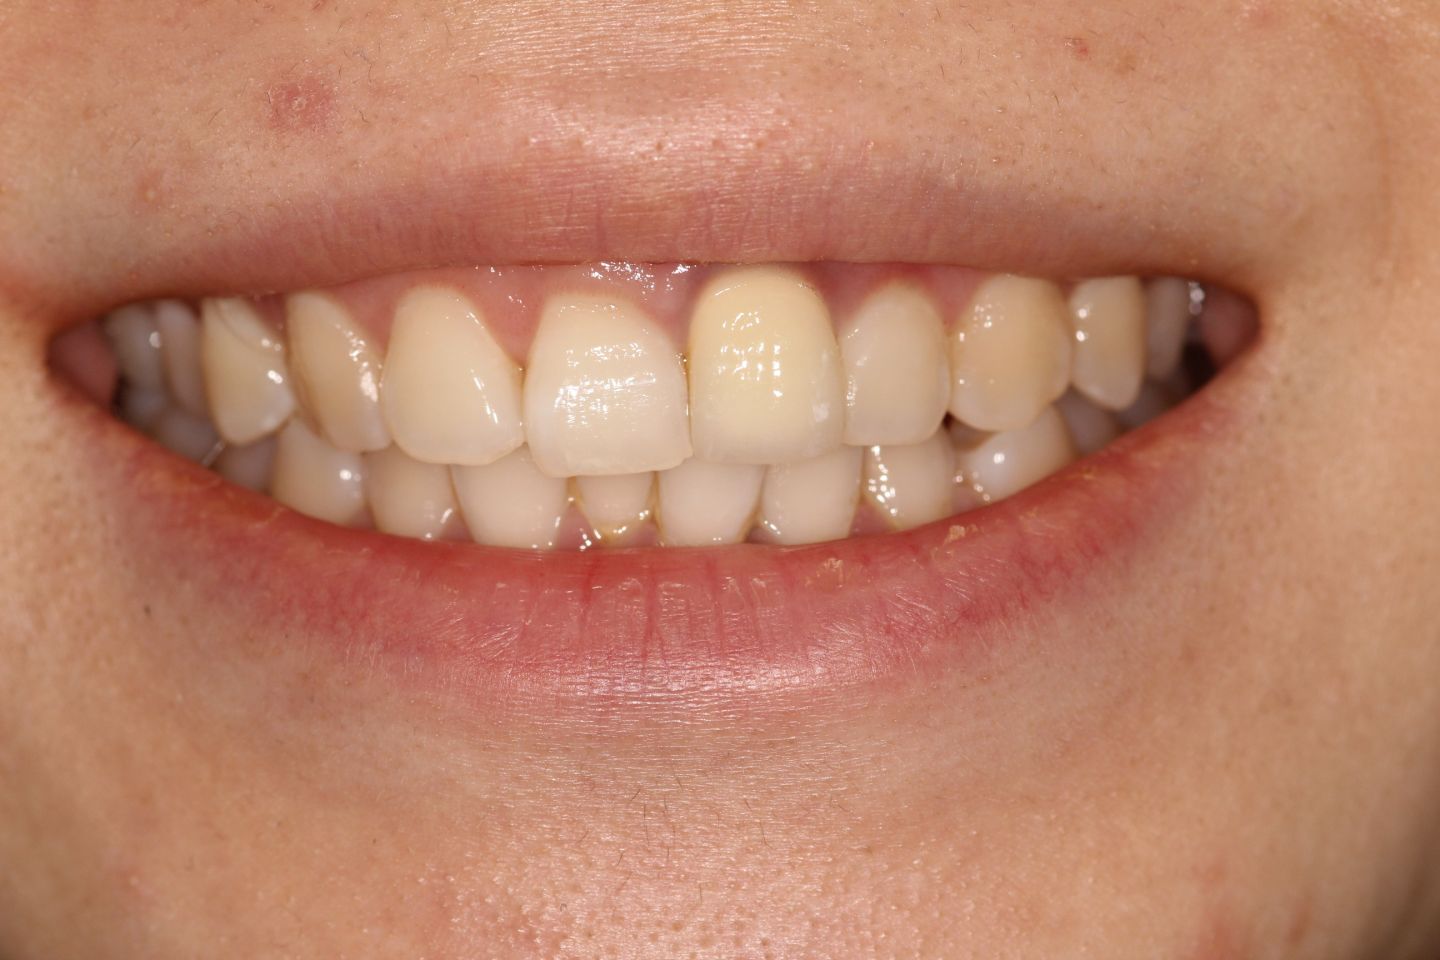 Annabelle - Invisalign, whitening, iTero and crown